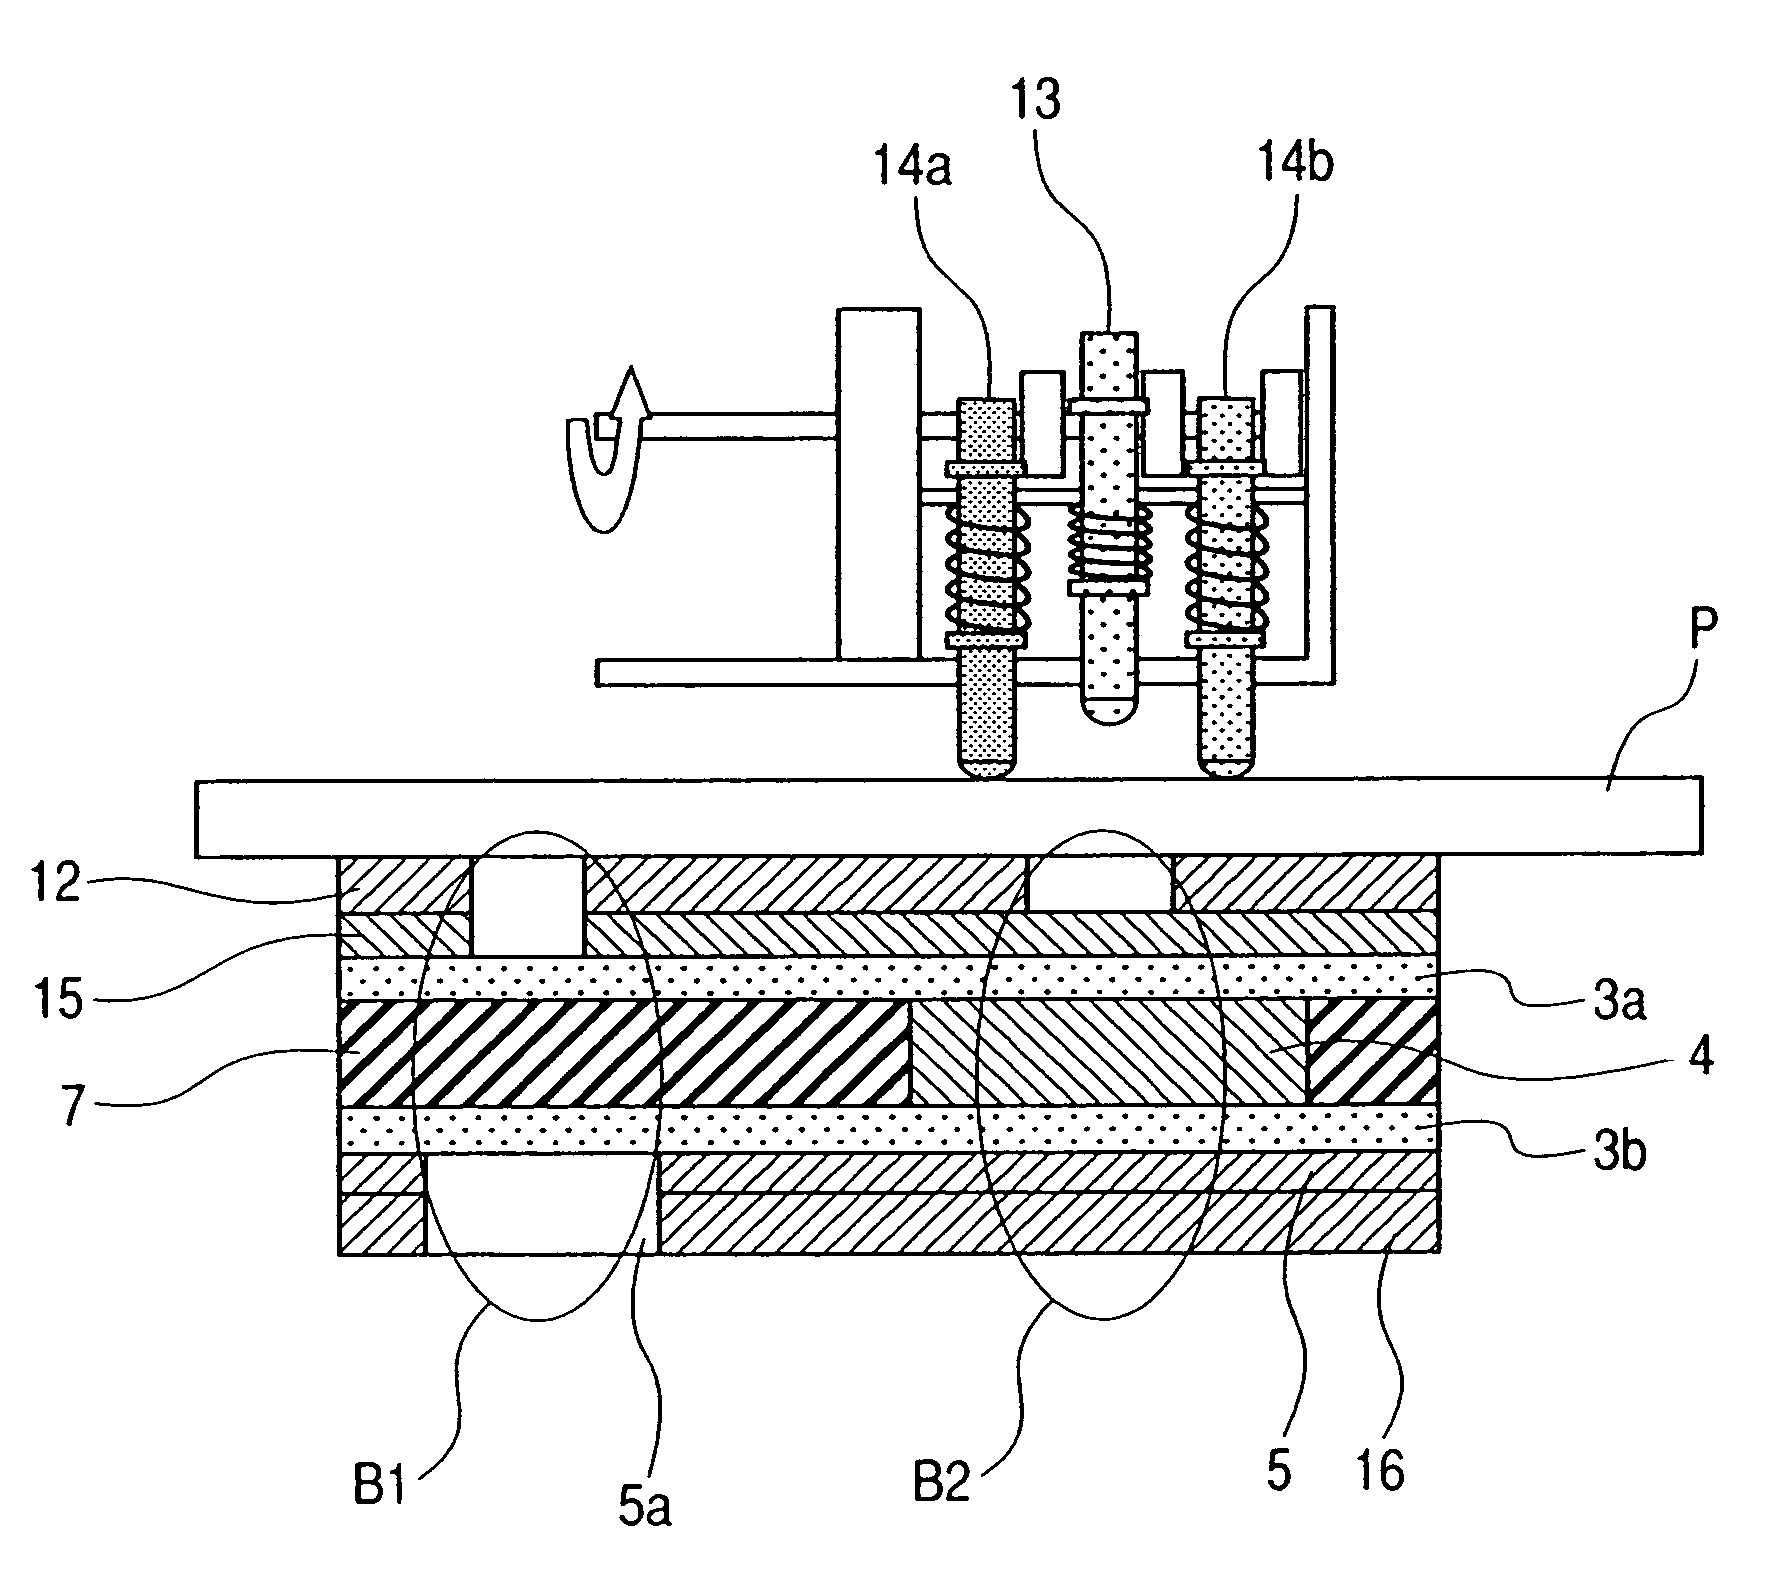 Device for identifying types of sheet materials